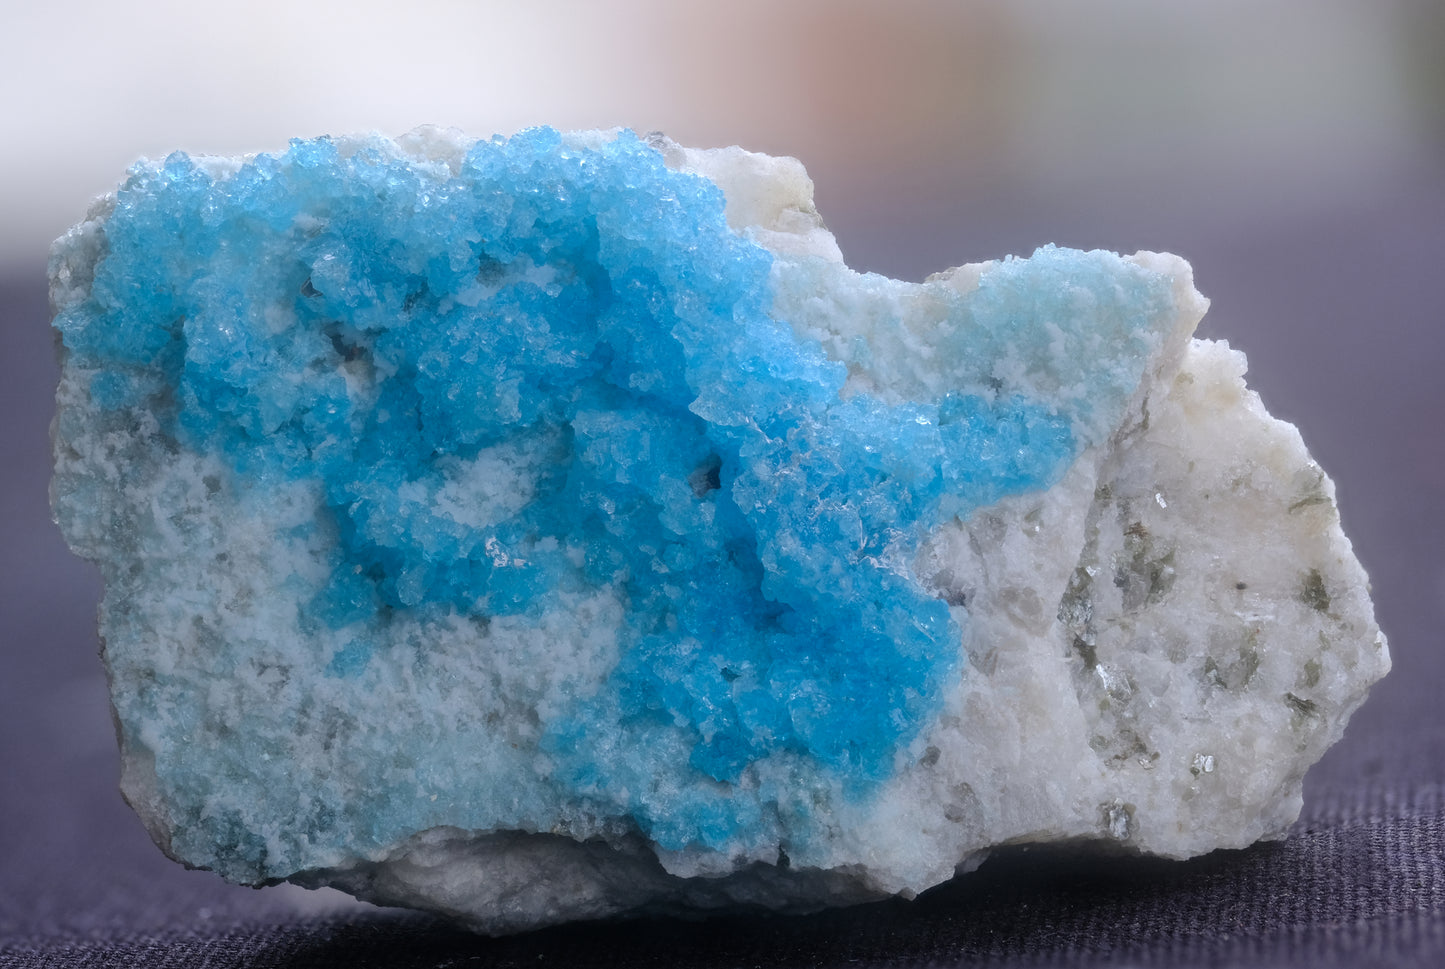 Rare blue hyalite opal from the famous Chalk Mine in Spruce Pine, NC. 